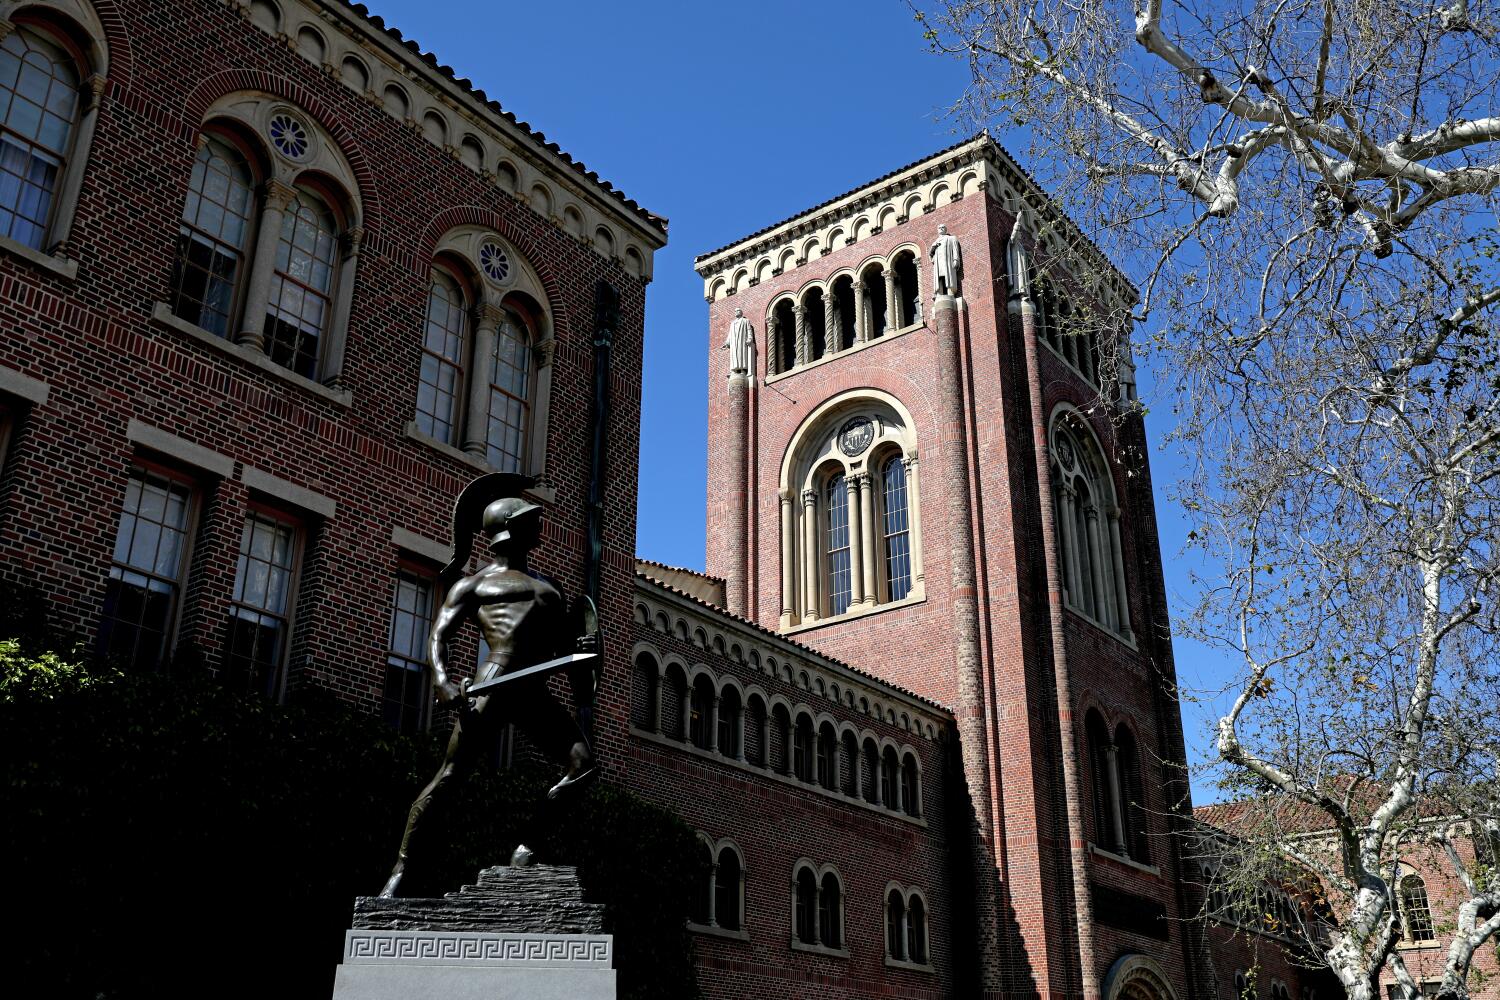 Tensions over Armenian crisis in Azerbaijan boil over in reportedly violent protest at USC